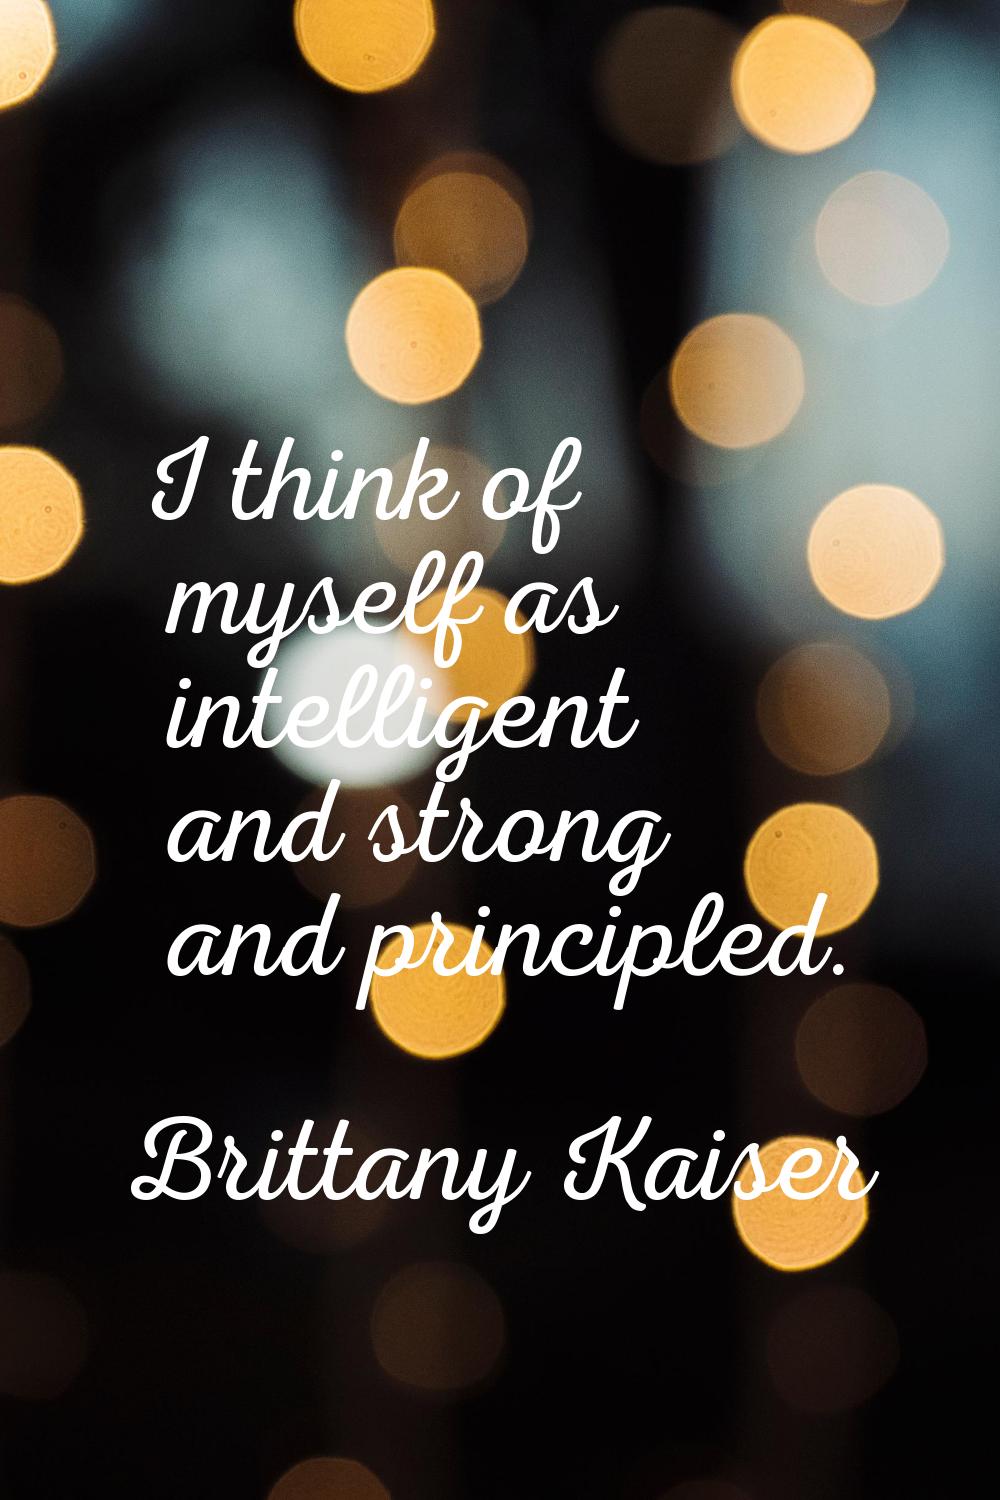 I think of myself as intelligent and strong and principled.